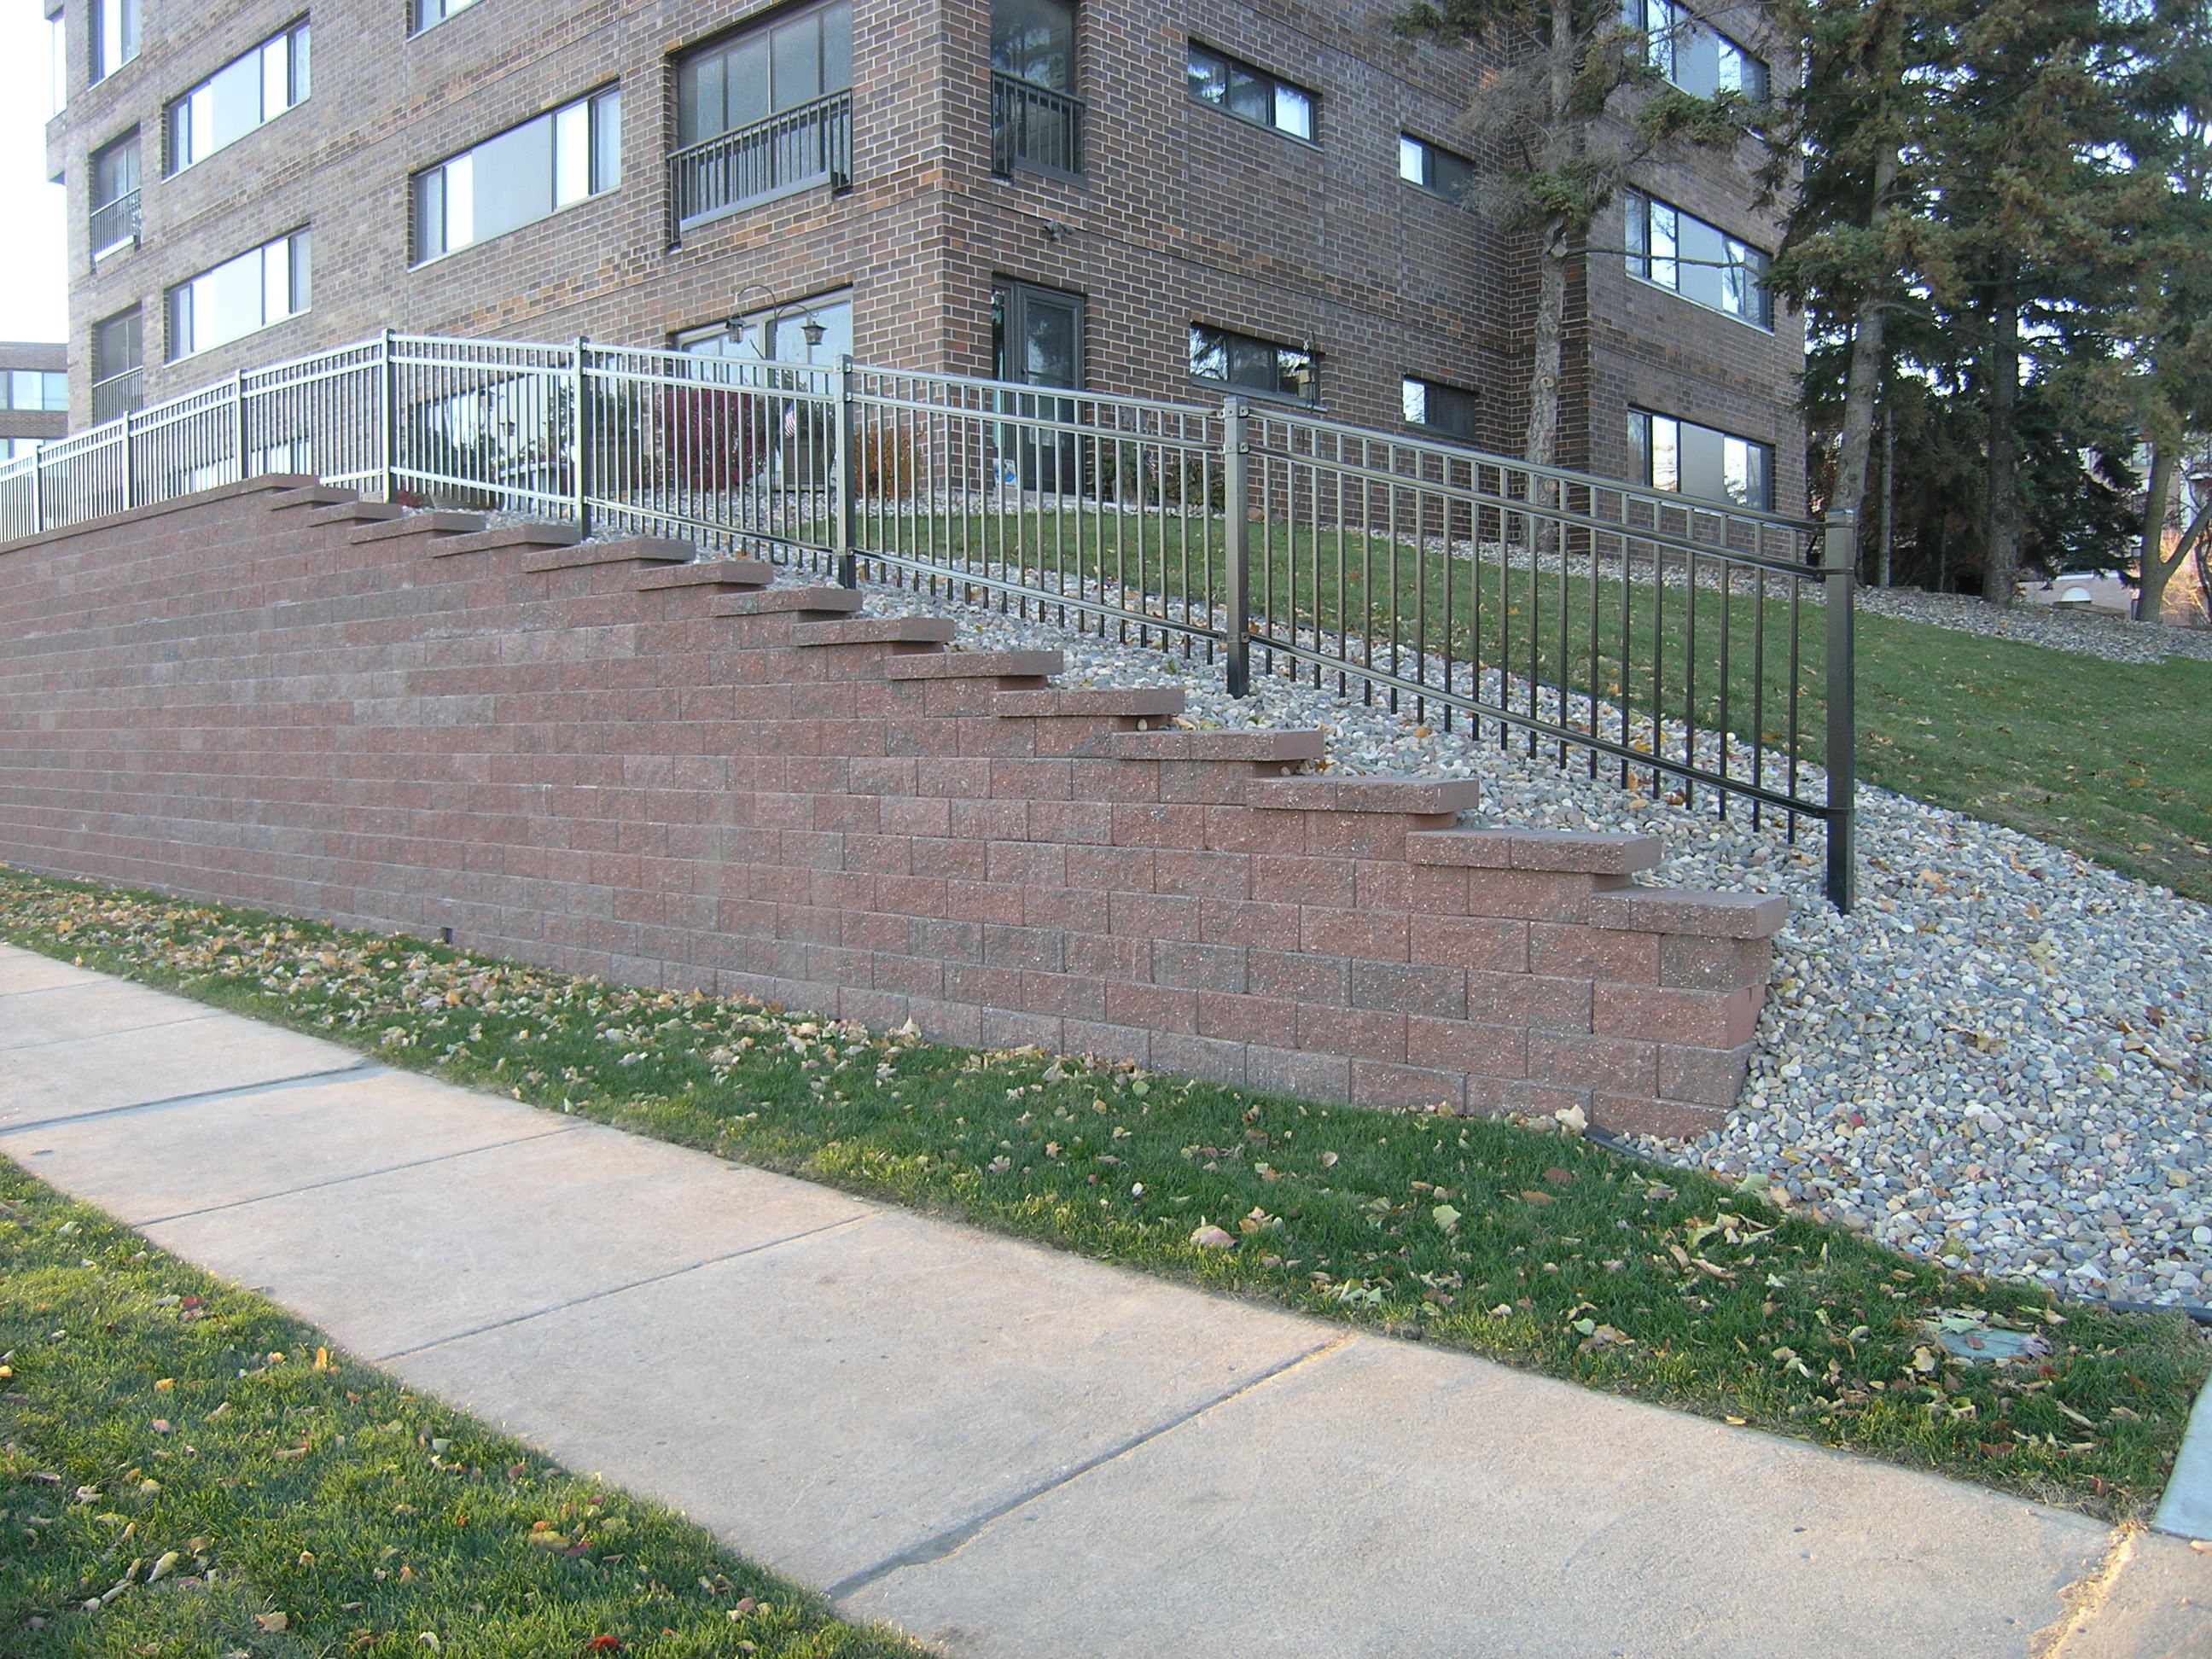 The new wall has a stepped-down transition along the slope.